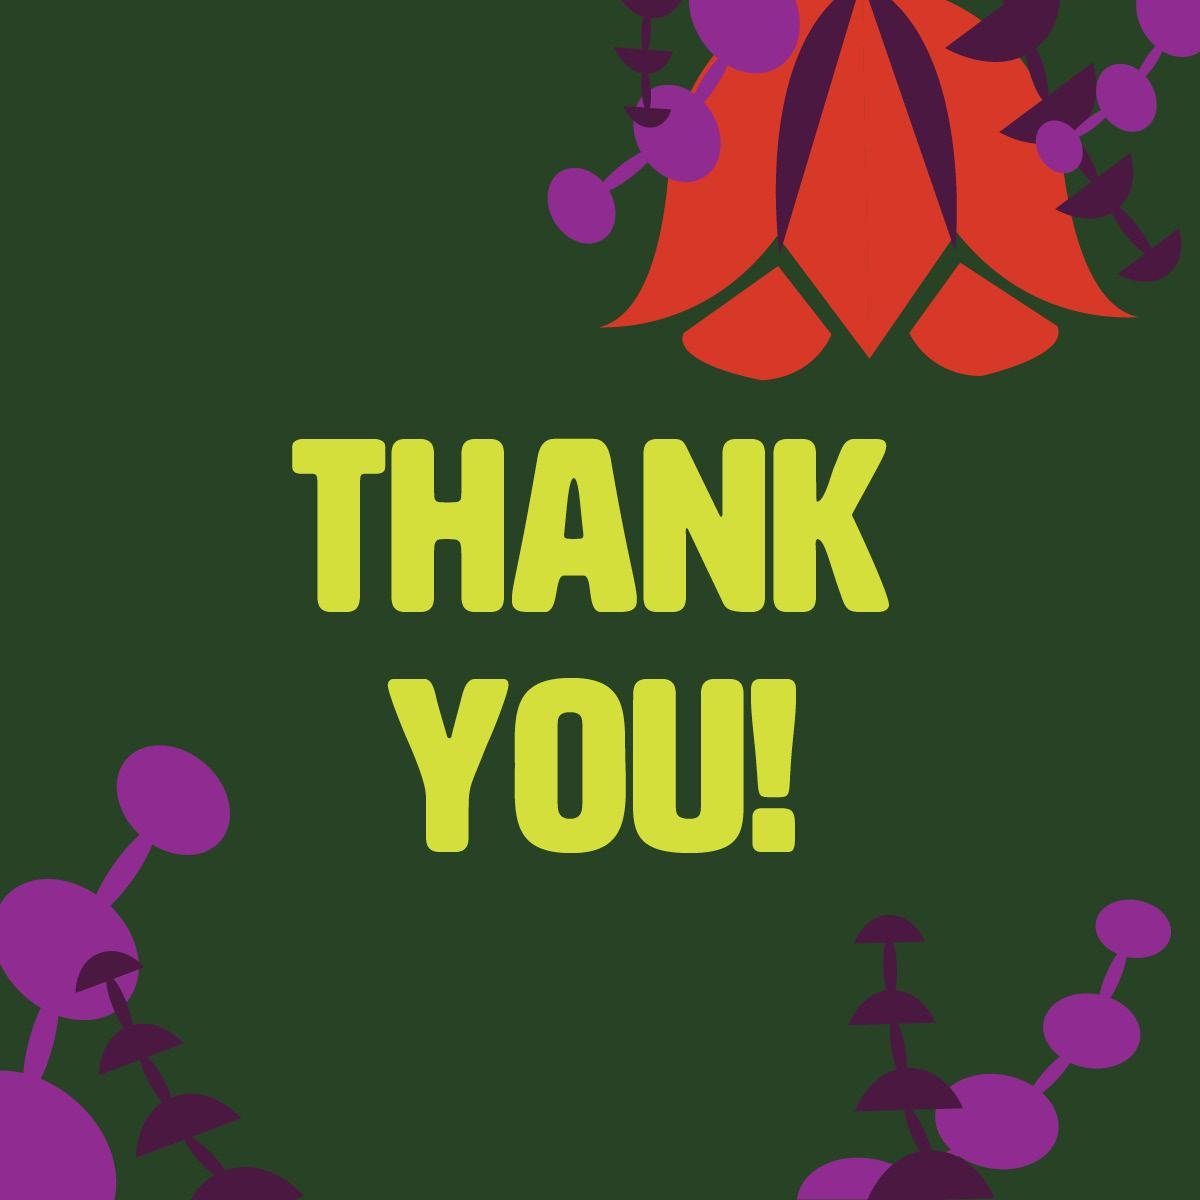 Thank you to all the amazing Event Sponsors, Table Sponsors, and Auction Donors for your support. You are truly to thank for making Art After Dark and the Chesterton Art Center FLOURISH! With your generosity, we are able to continue championing the a